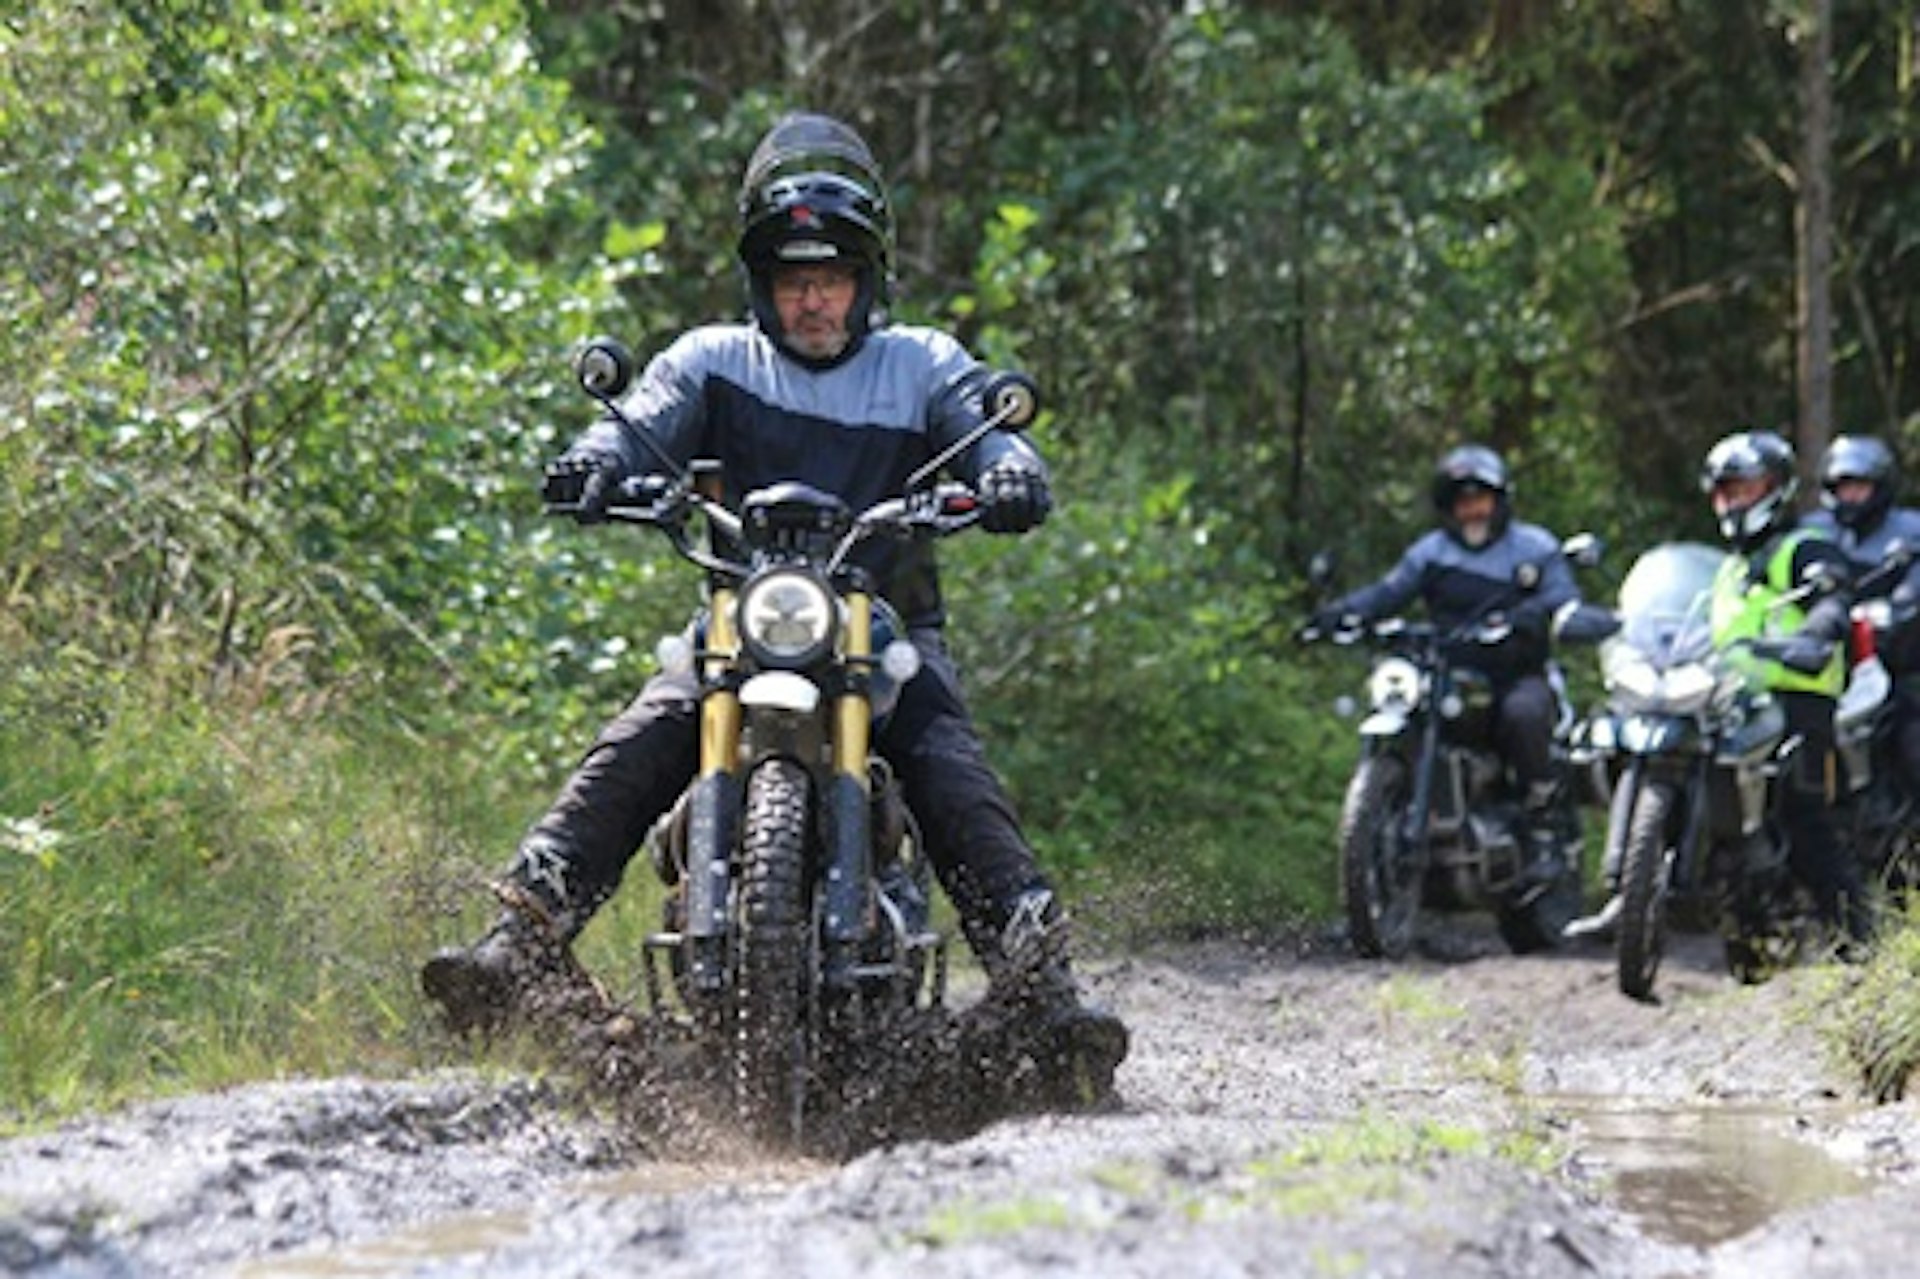 Half Day Off-Road Motorcycle Training at Triumph Adventure 4